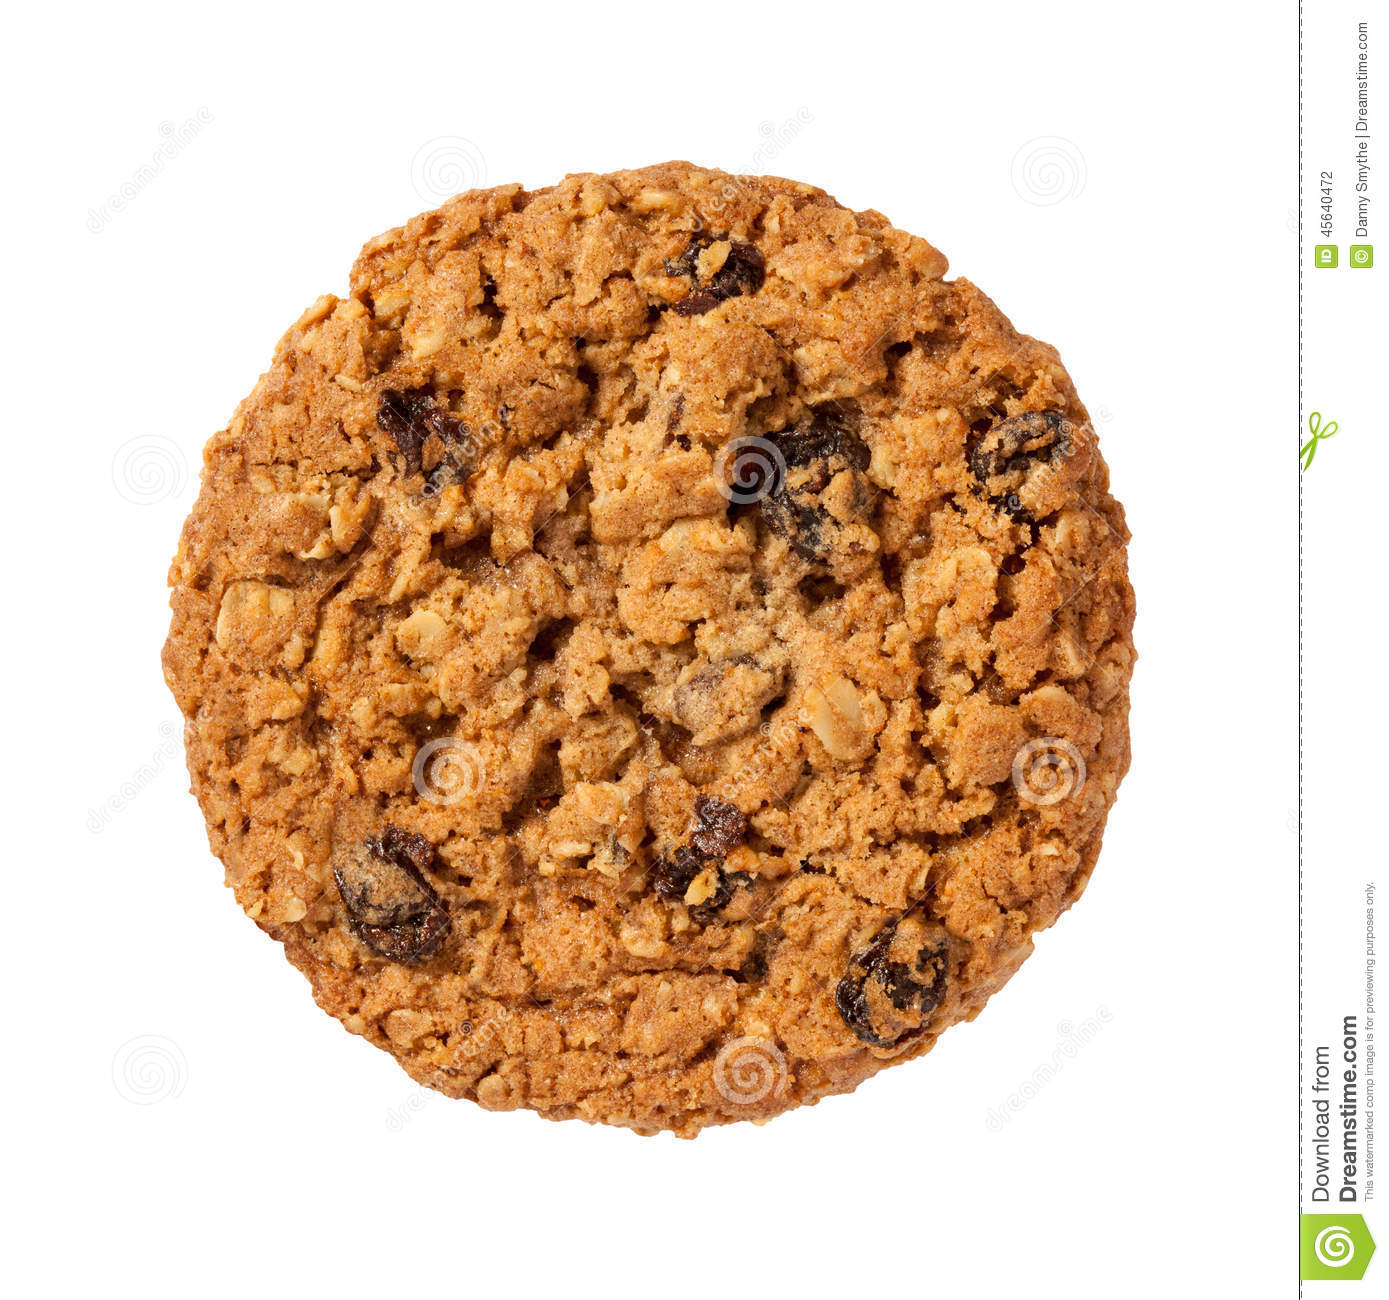 Oatmeal Raisin Cookie Isolated On A White Background The Isolation Is